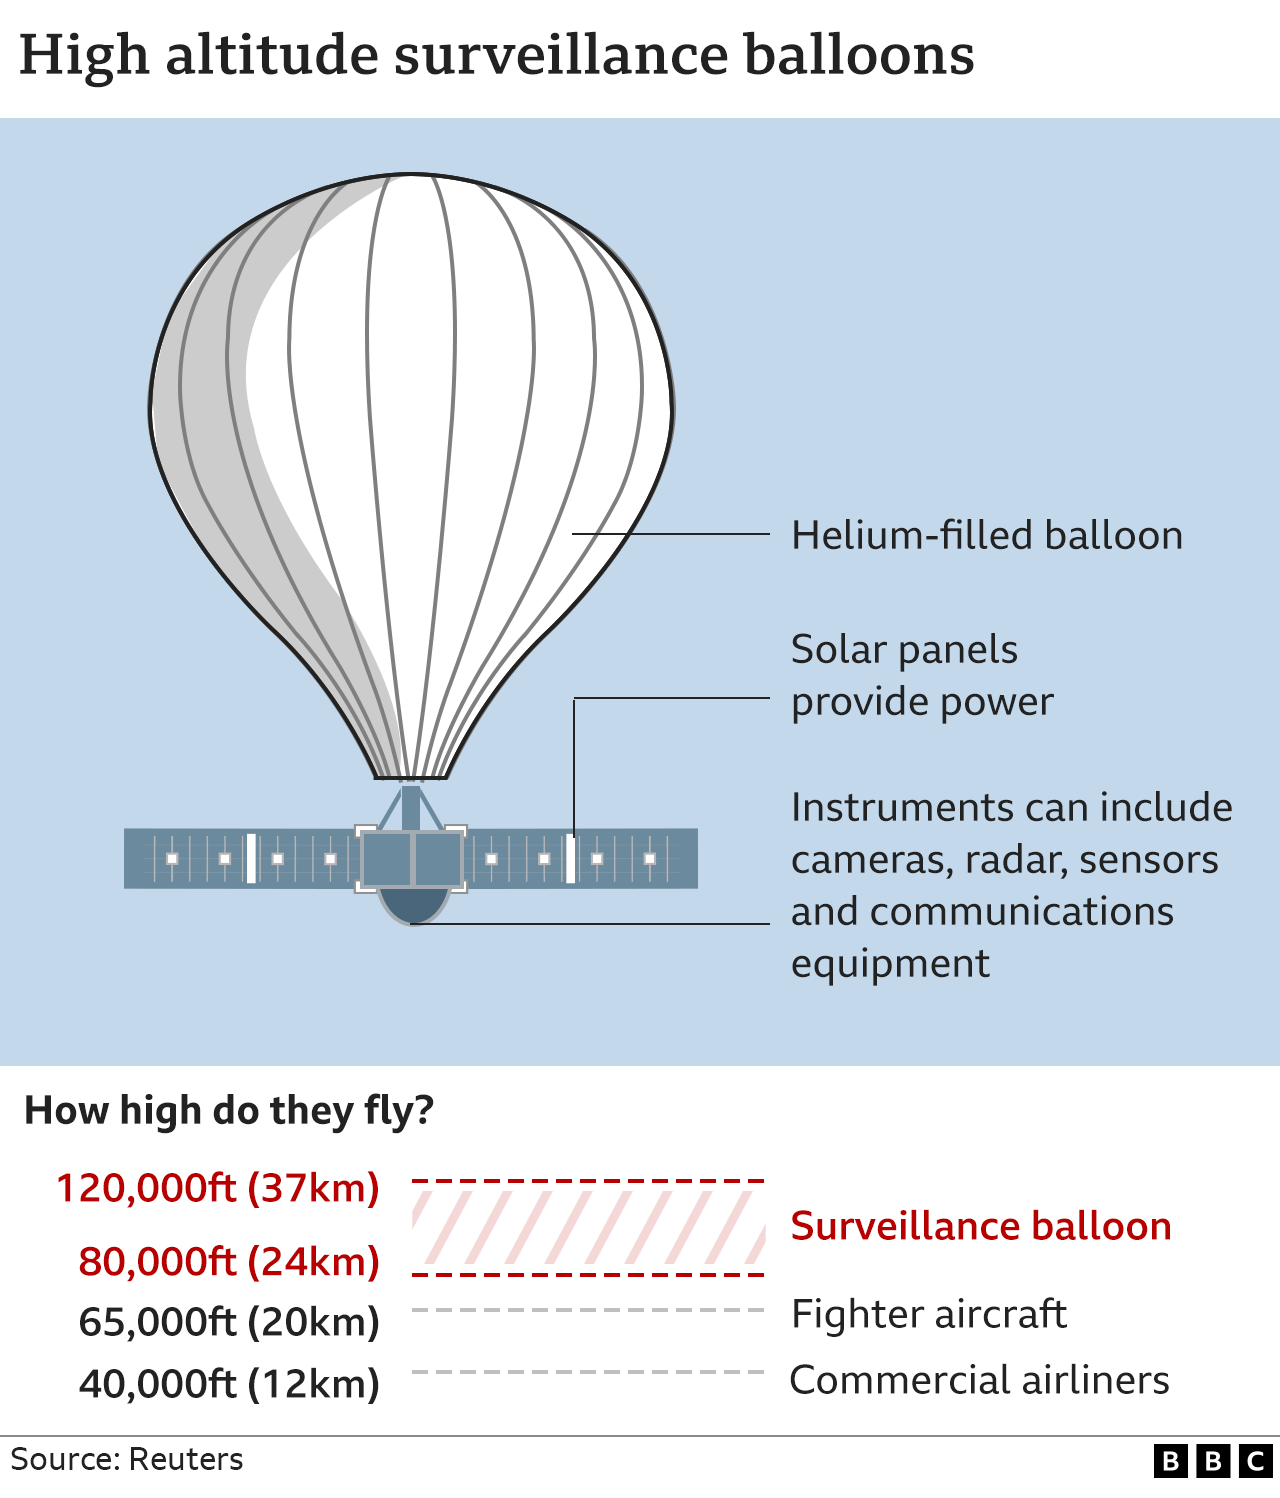 Graphic showing a high-altitude balloon